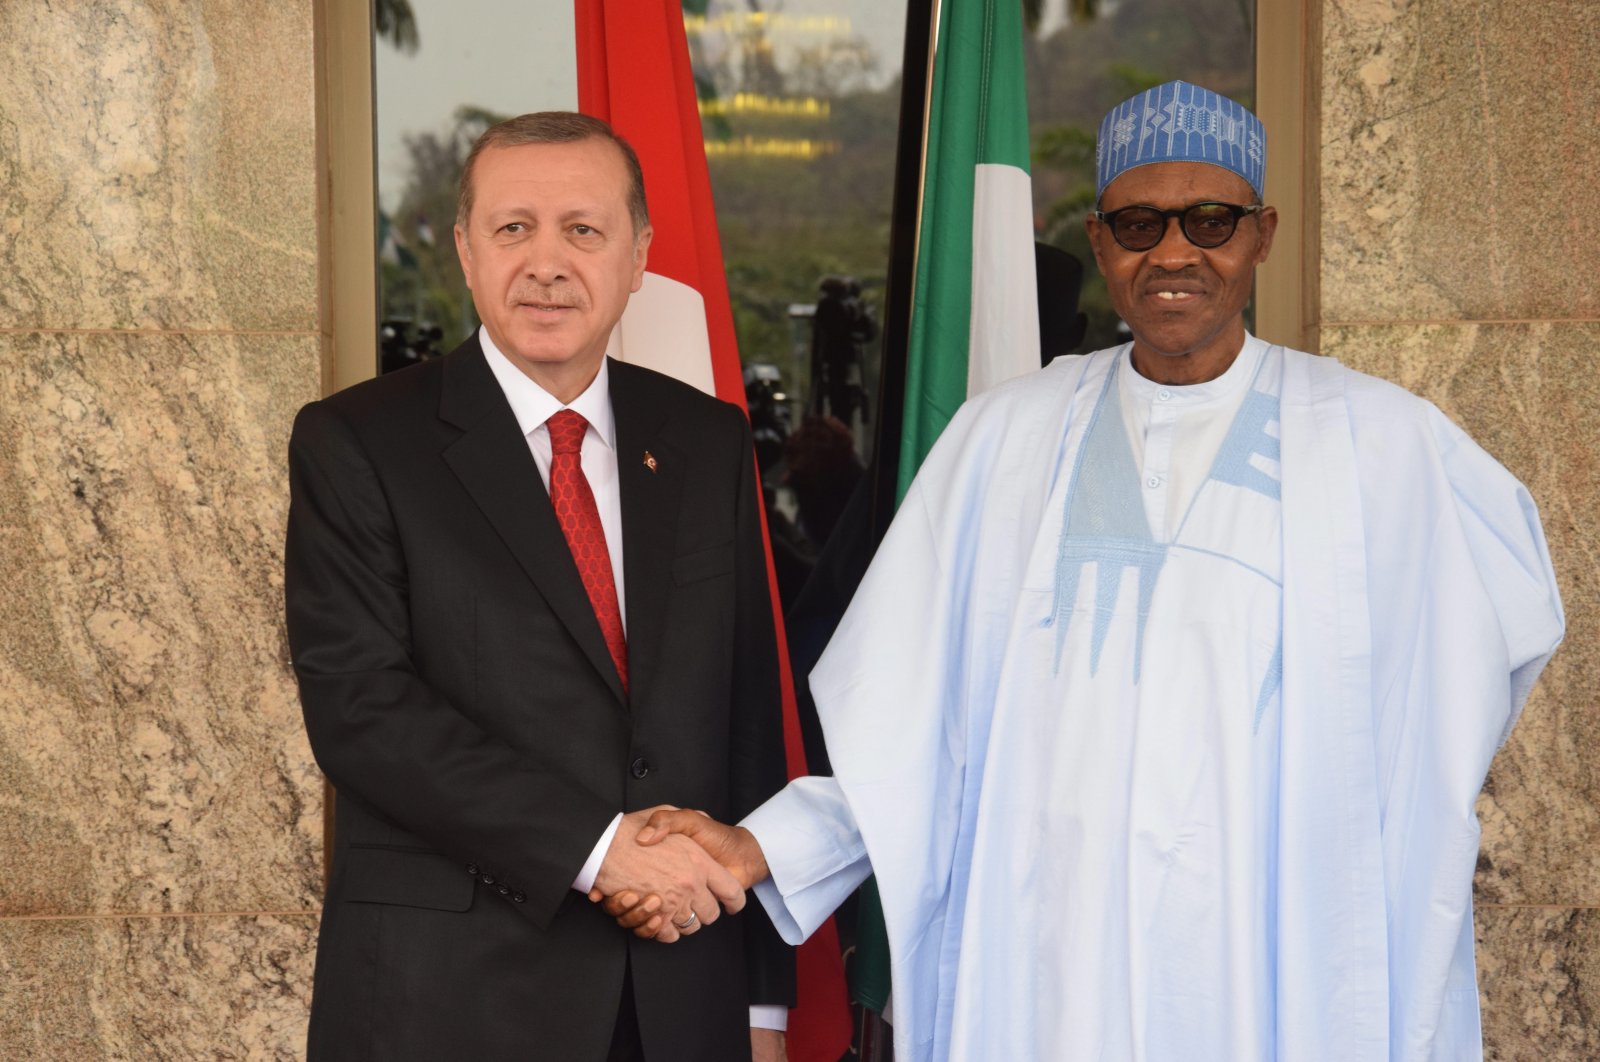 President Recep Tayyip Erdoğan (L) is welcomed by Nigeria's President Muhammadu Buhari, during an official visit at the Presidential Palace in Abuja, Nigeria, March  2, 2016. (AP Photo)